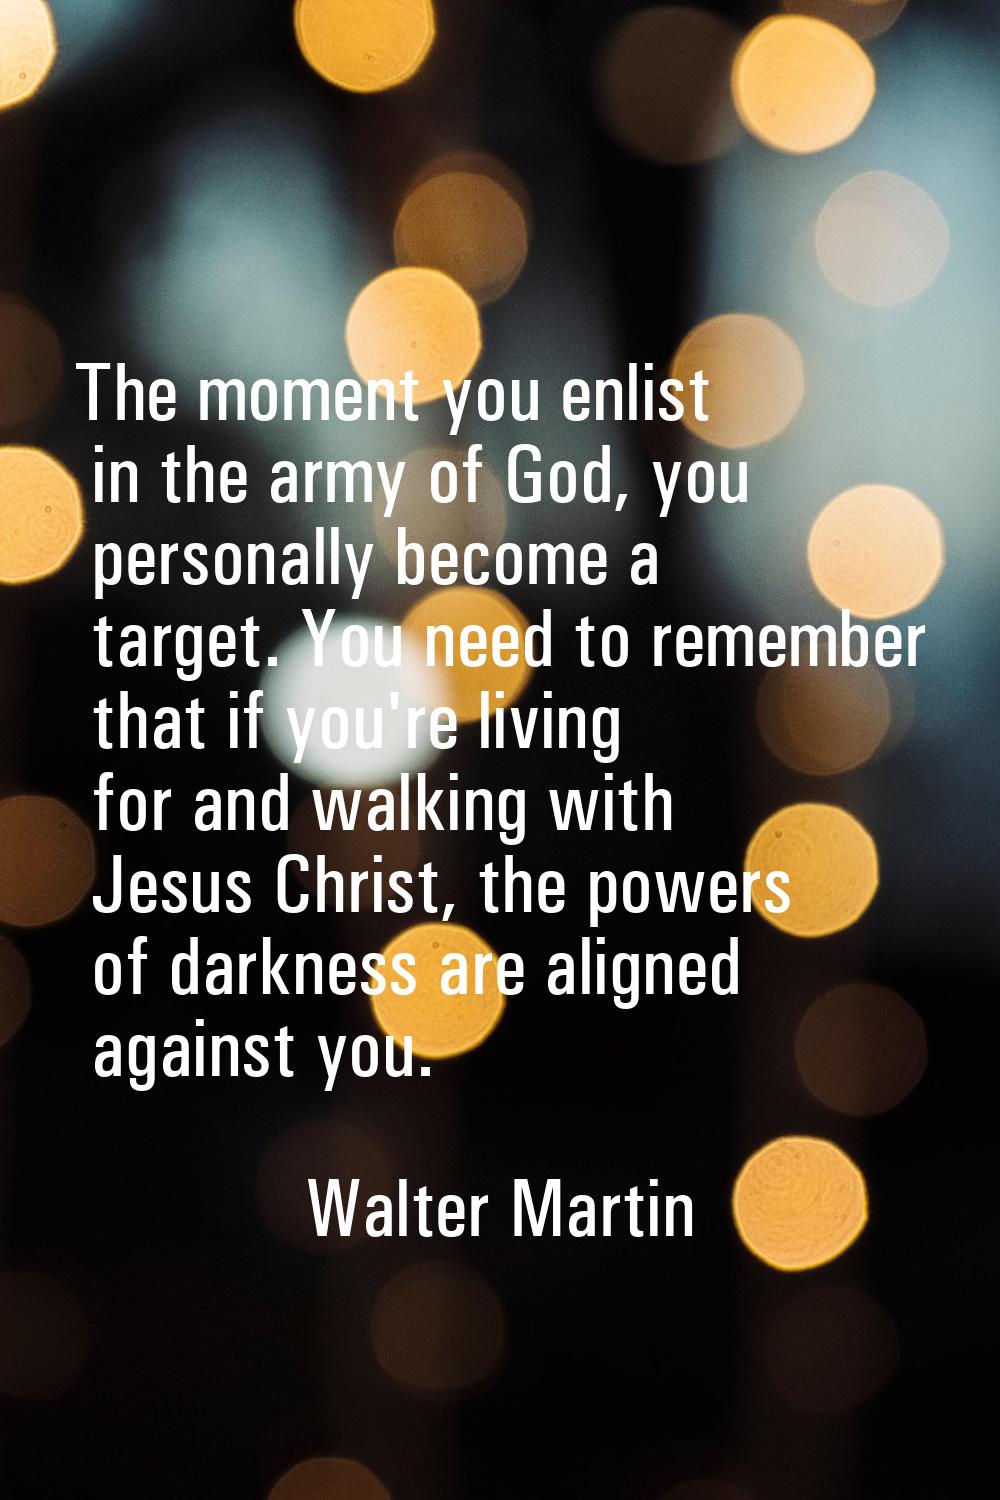 The moment you enlist in the army of God, you personally become a target. You need to remember that